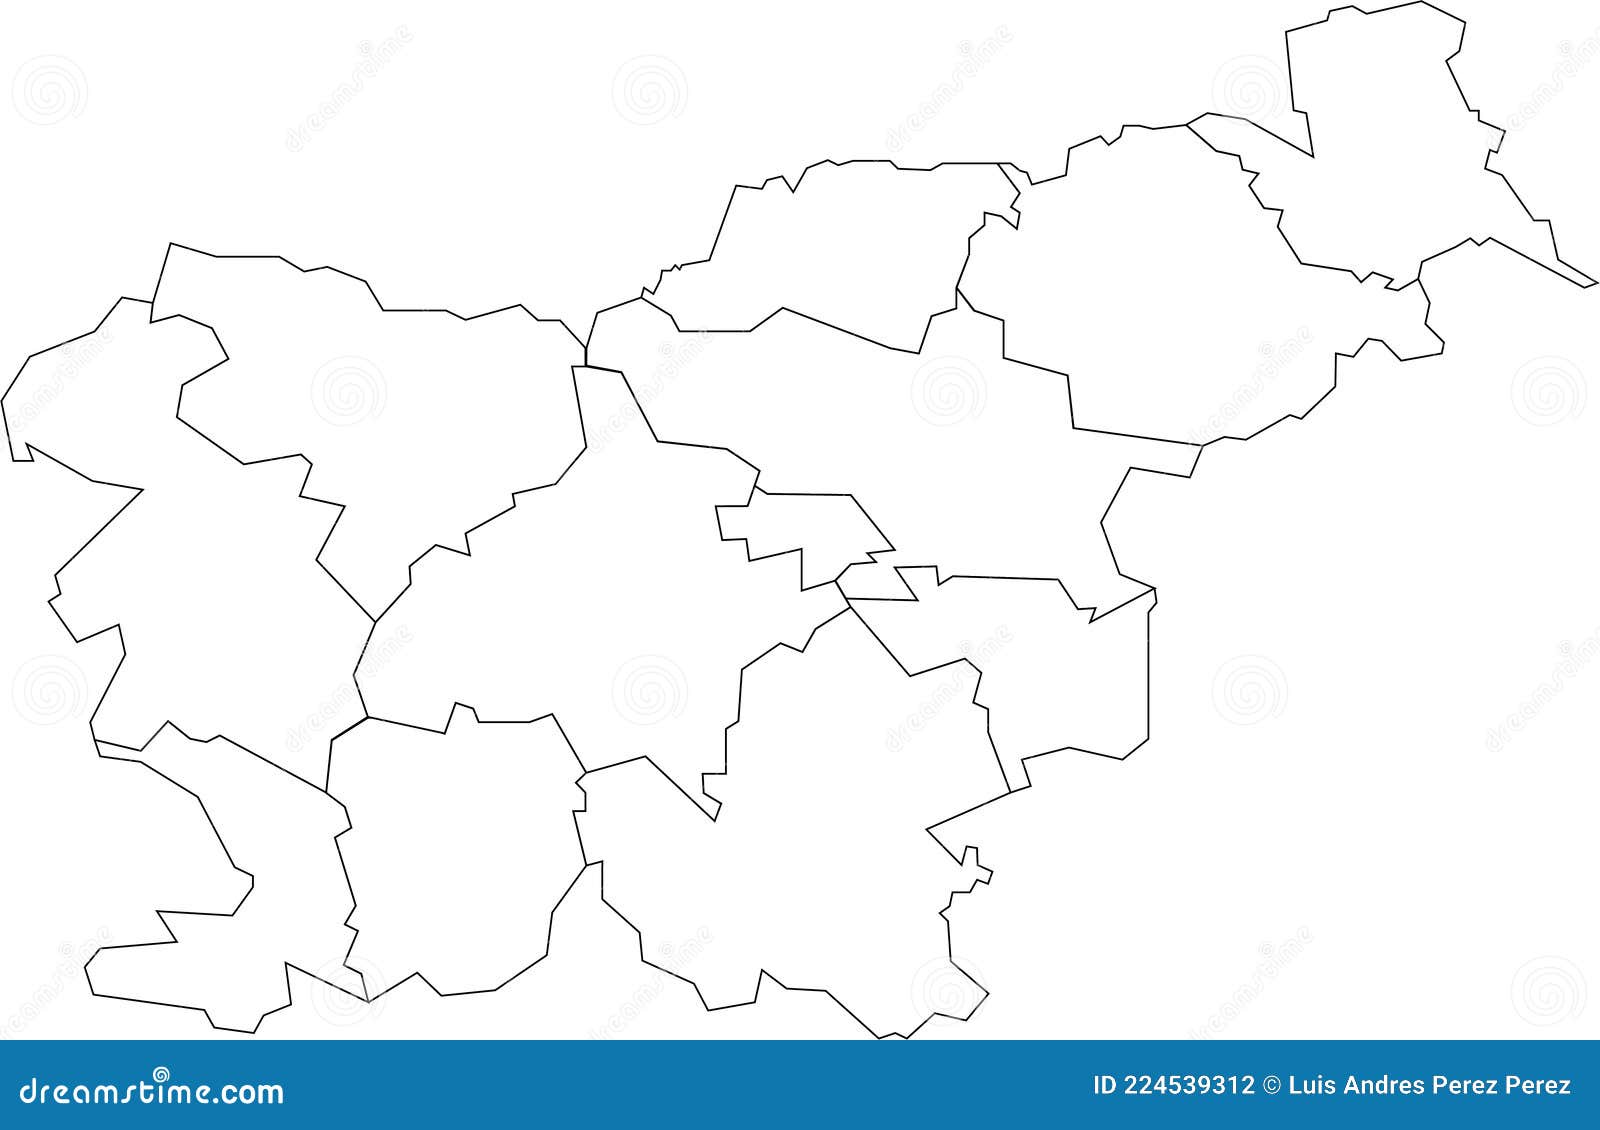 map of eslovenia to study colorless with outline